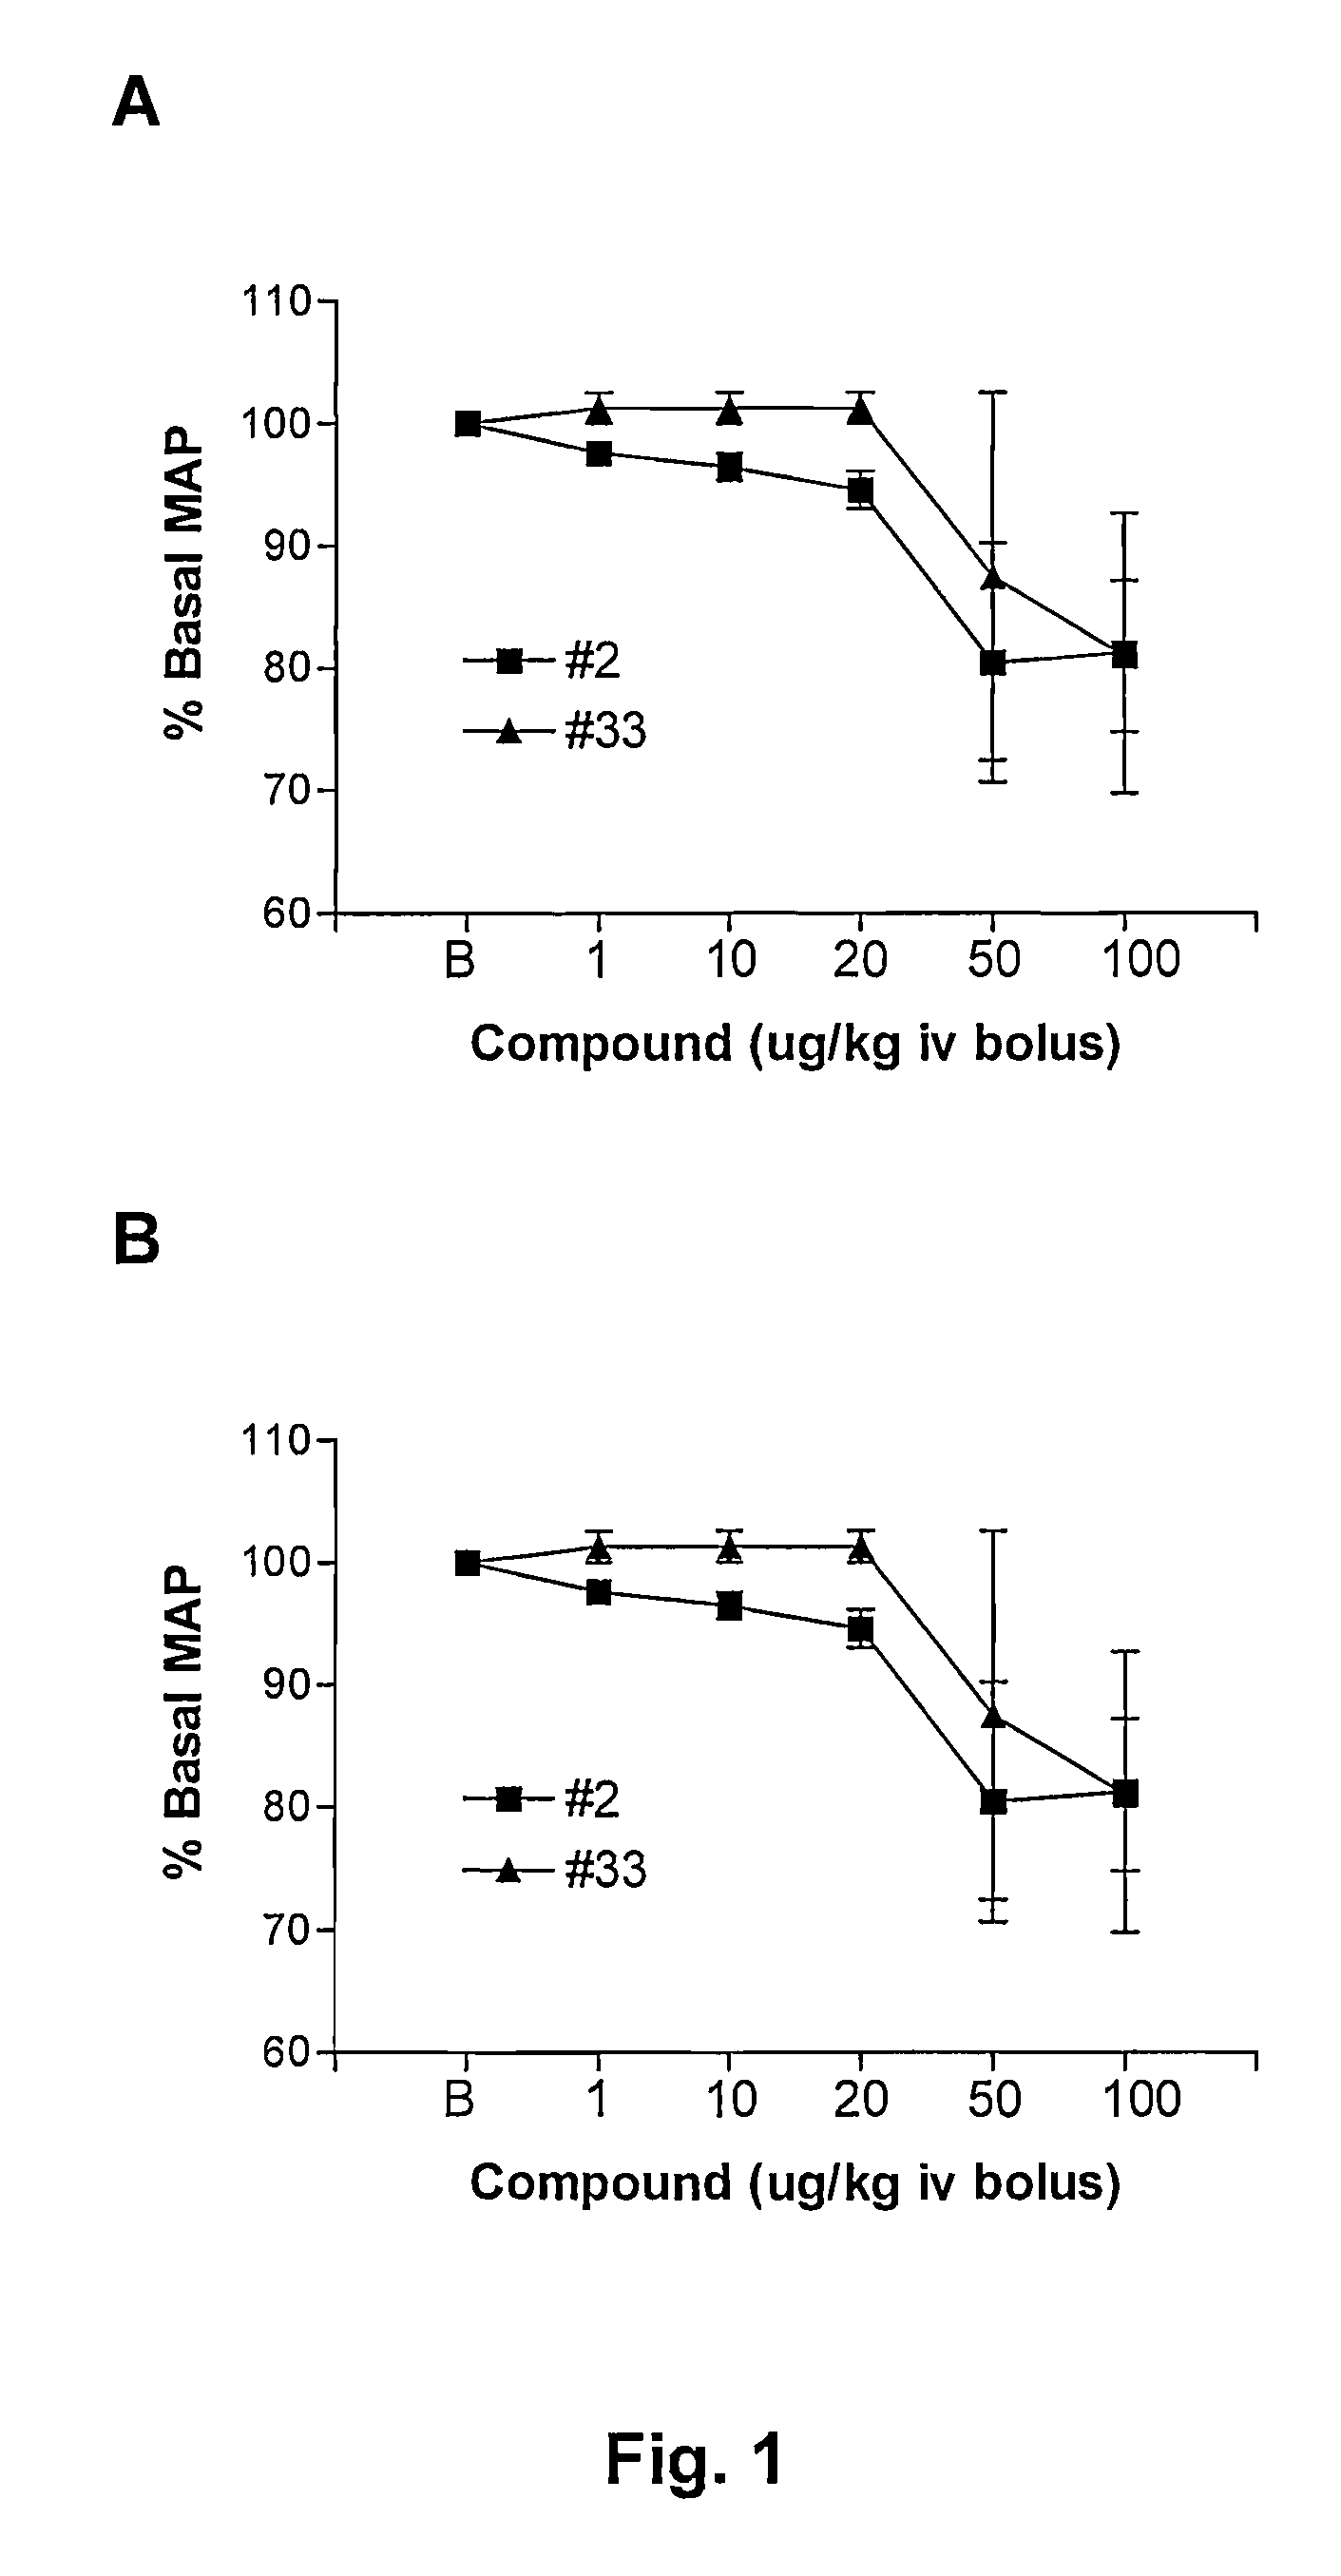 Bifunctional hormone having alpha-MSH activity and natriuretic peptide activity and uses thereof